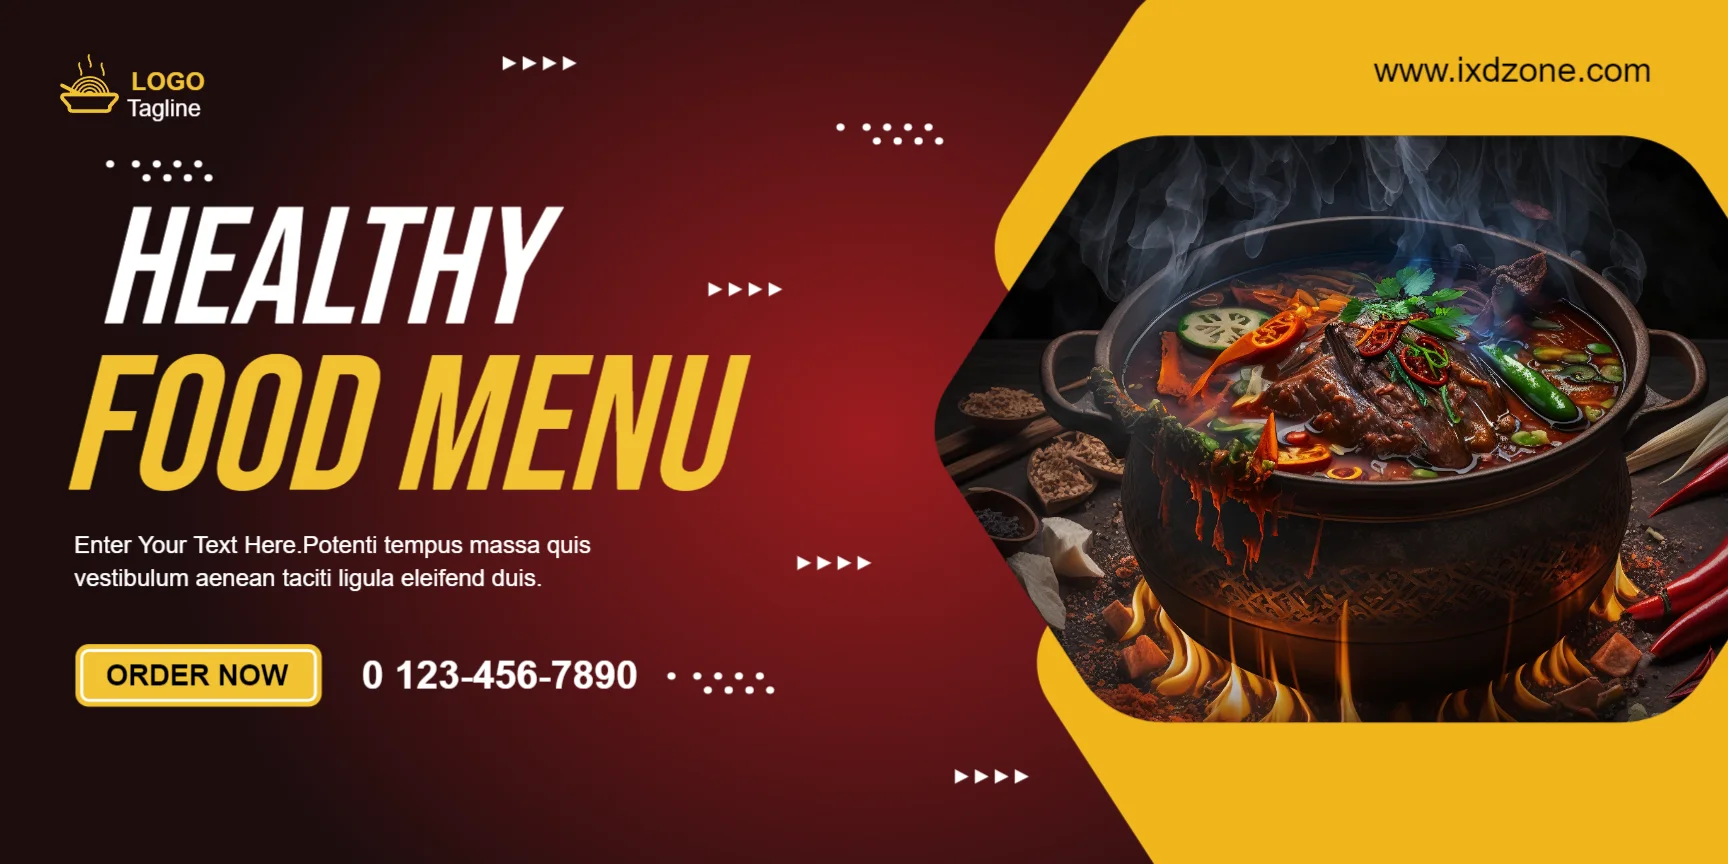 You can design food banners online using various tools.